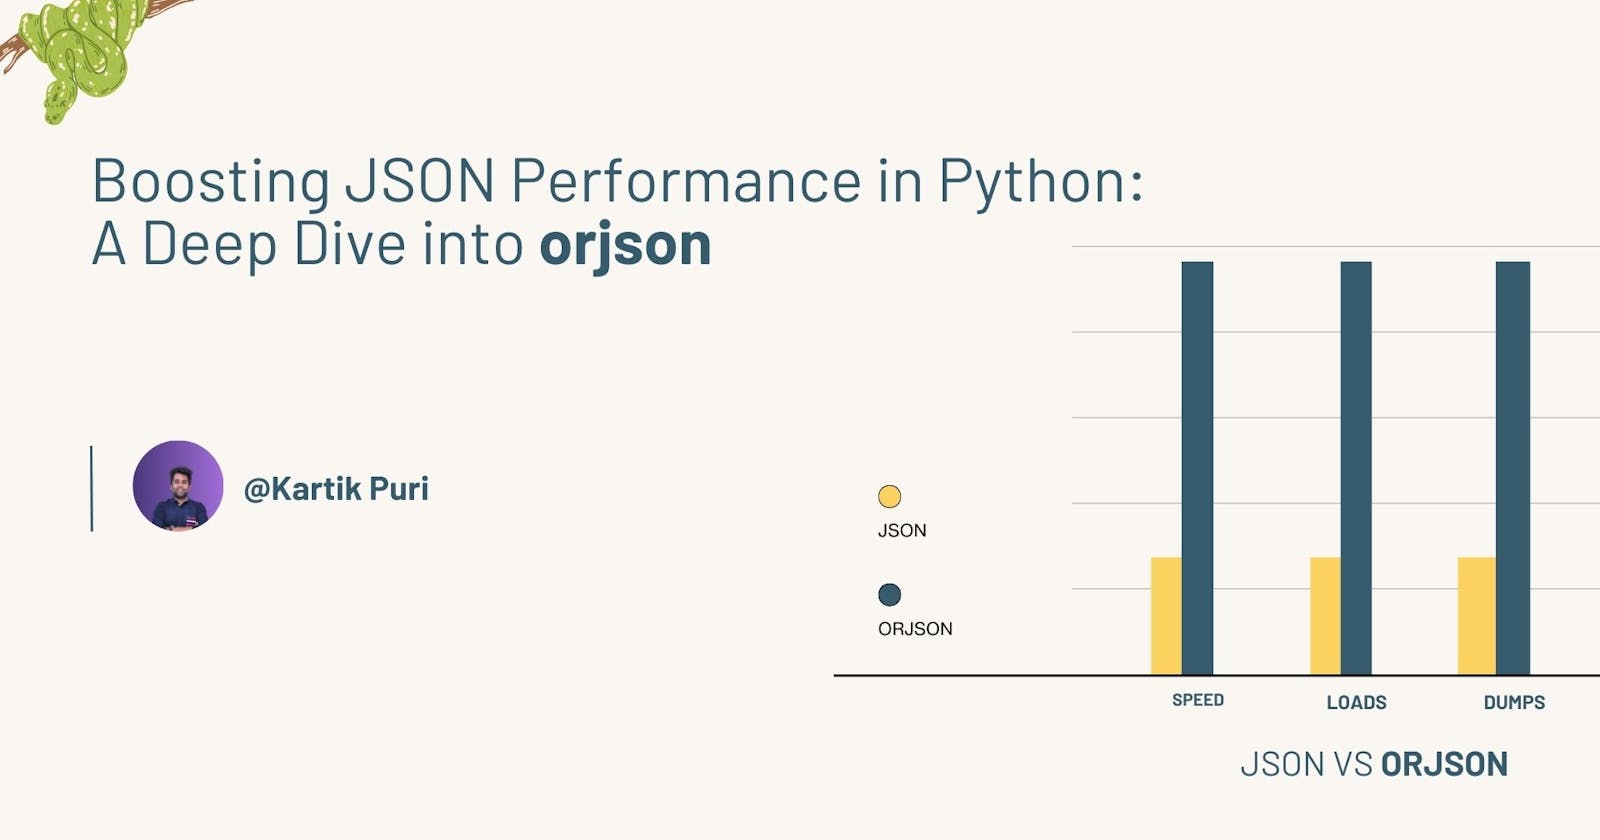 Boosting JSON Performance in Python: A Deep Dive into orjson